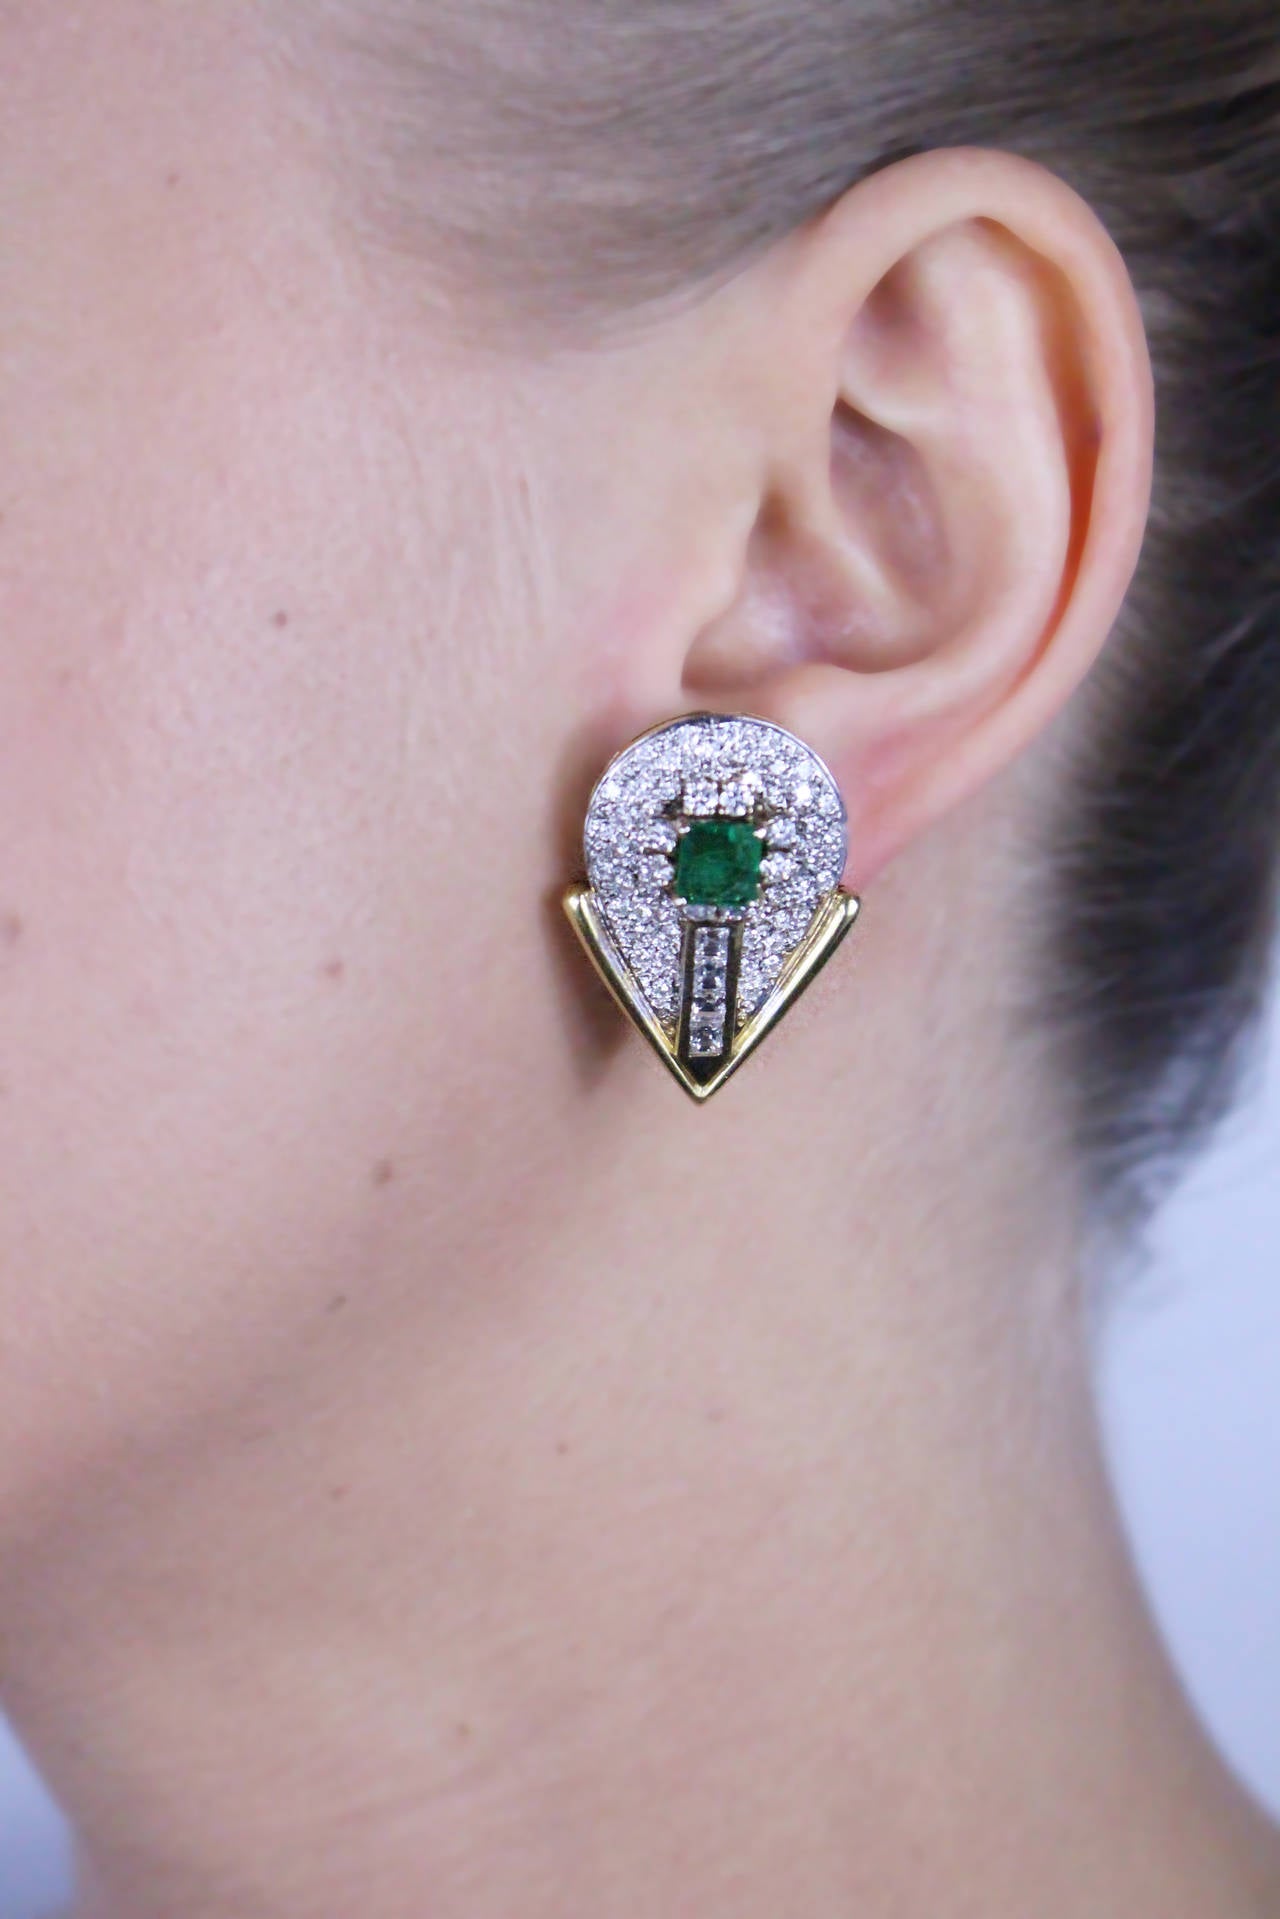 Natural Emerald and diamond earrings set with 124 round and square diamonds weighing approximately 2.80 carats, and 2 square cut natural emeralds. 

Metal Type: 18Kt Yellow Gold
Metal Weight: 24 Grams